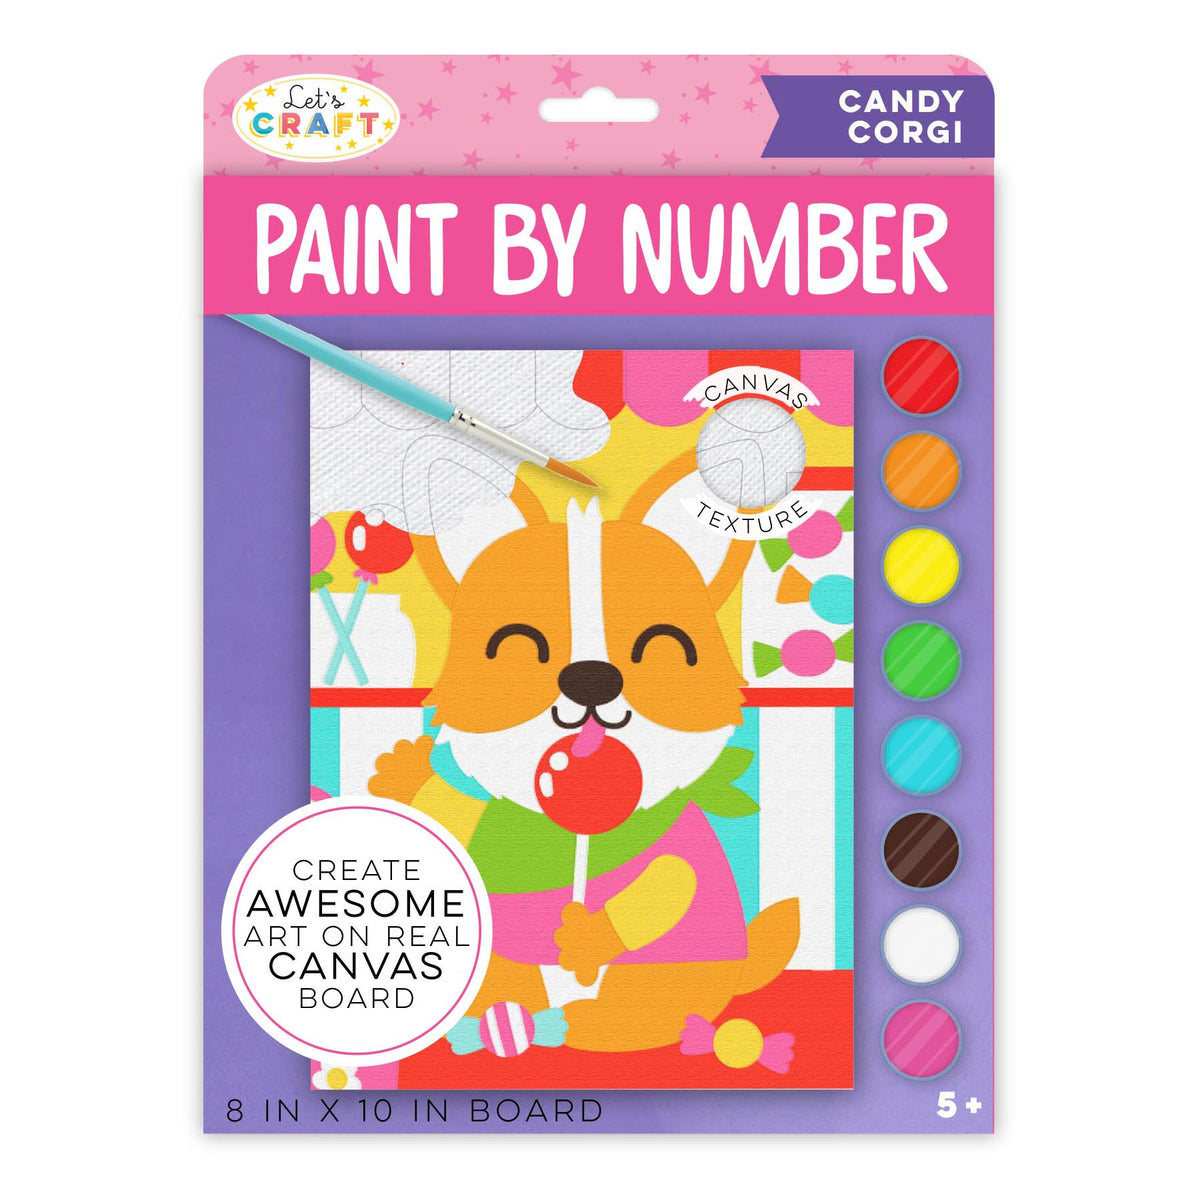 Paint by Number for Kids: Paint by Number Sweets Wall Art from